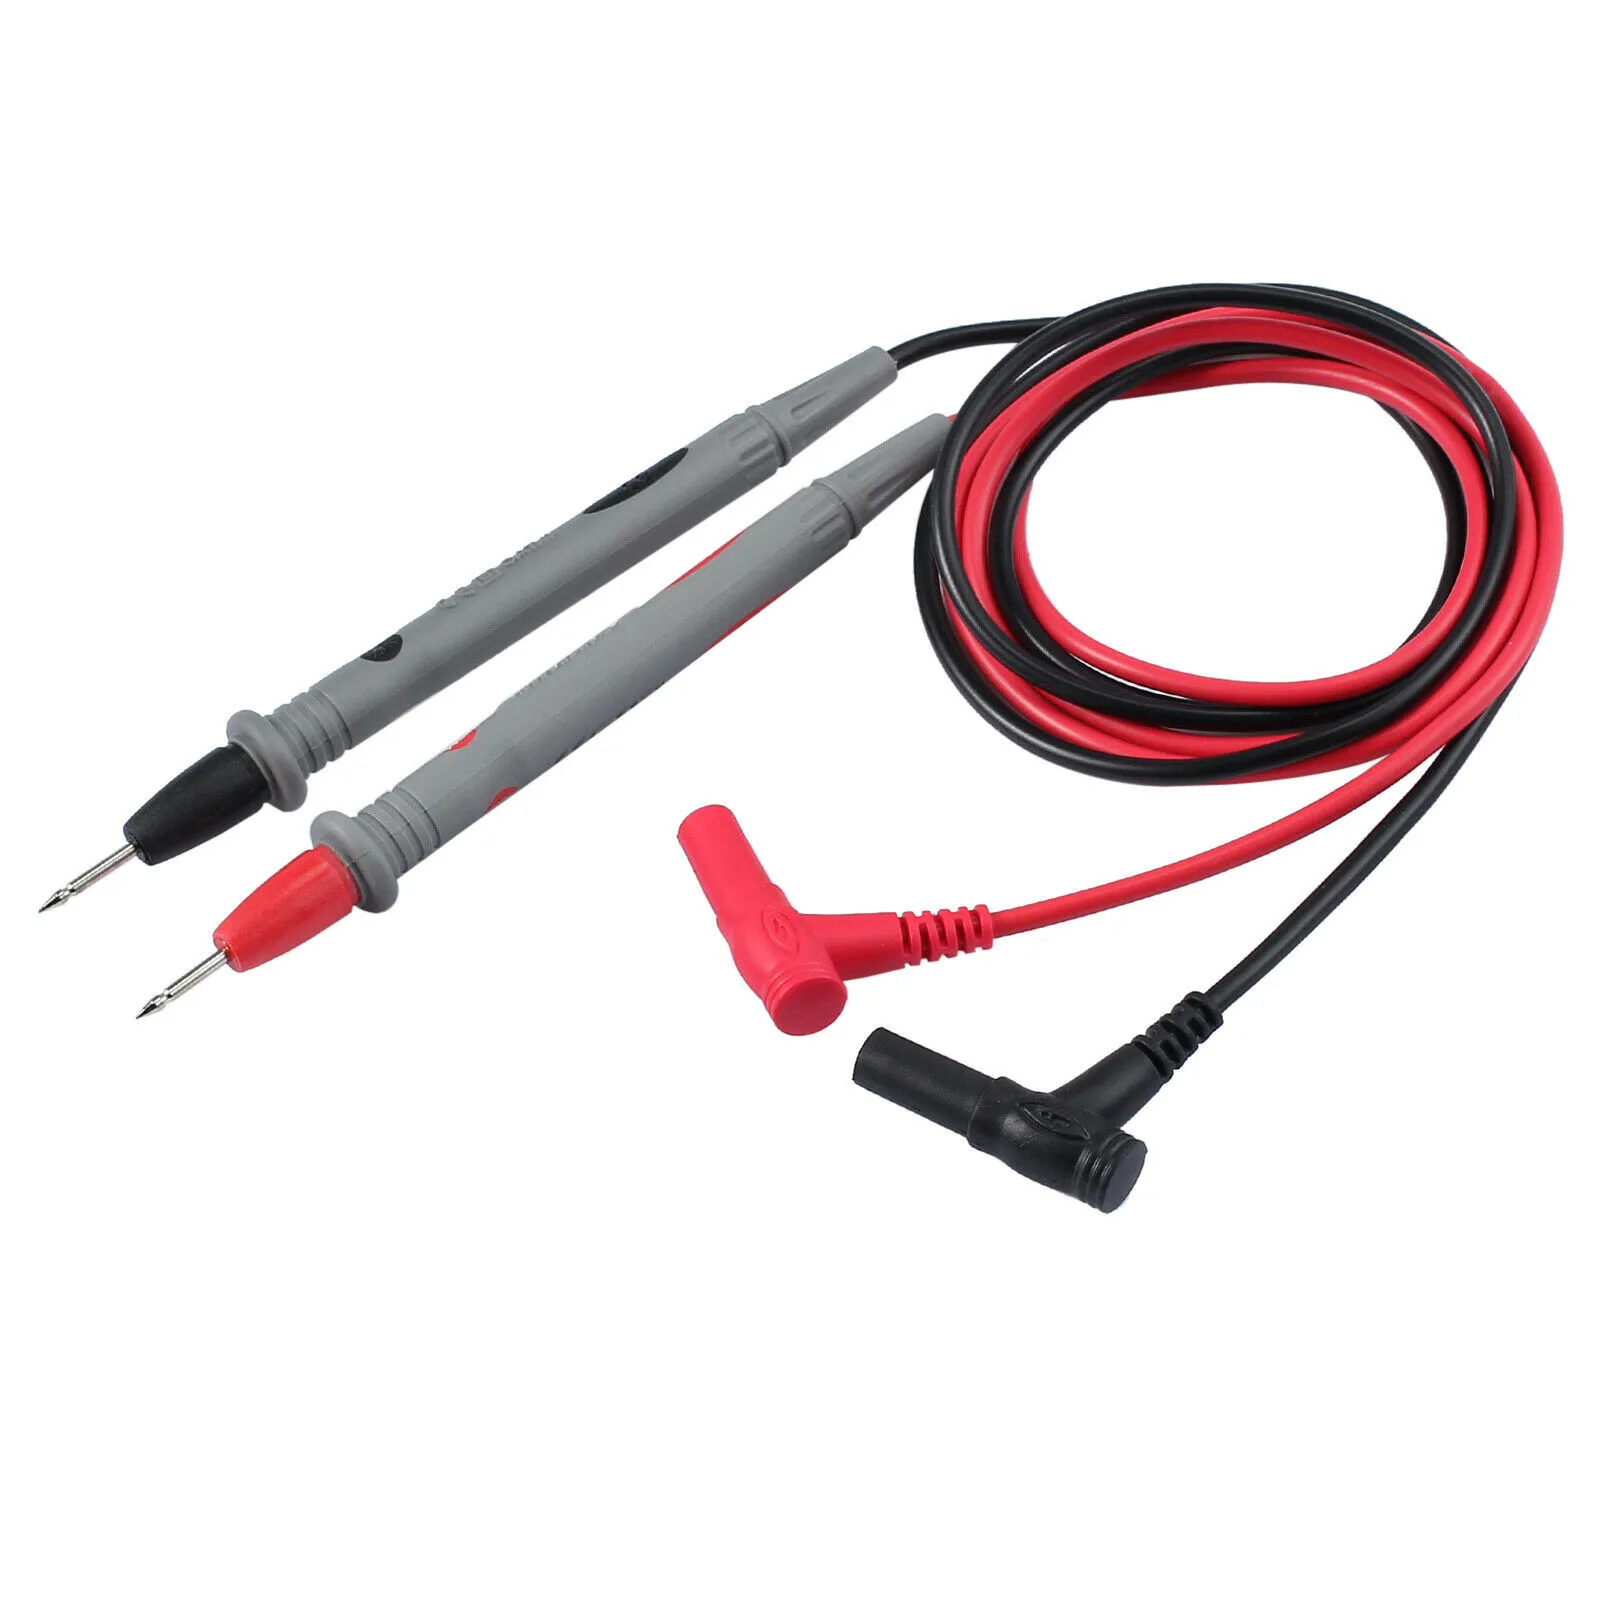 8 In 1 Probe Cable With Alligator Clip 1000V 10A For Fluke Multimeter Test Lead 